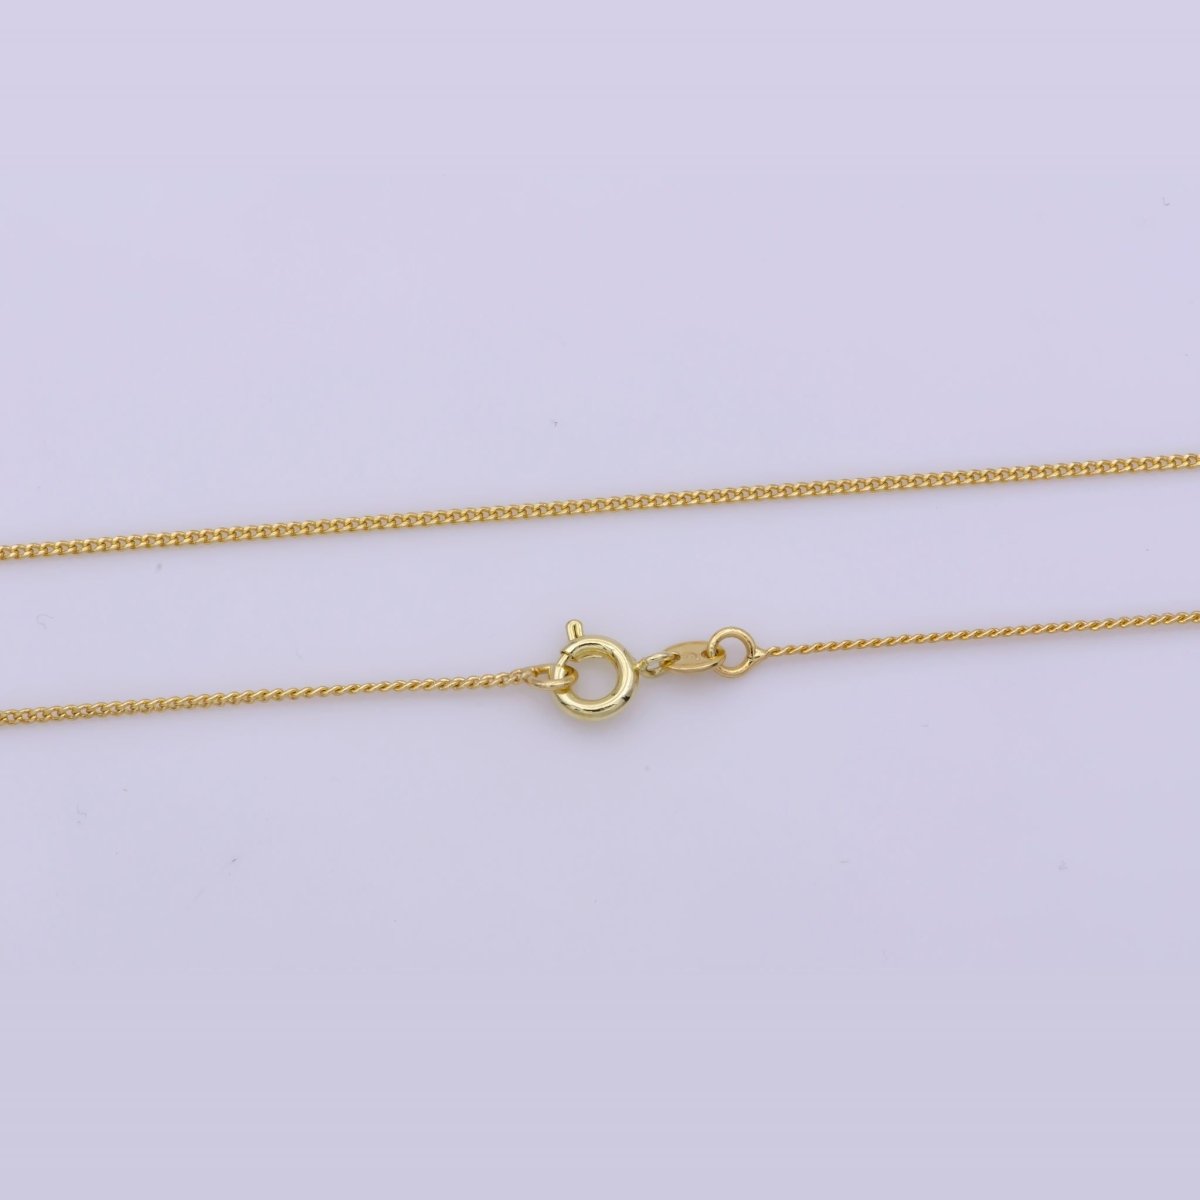 14k Gold Filled Cable Finished Chain, Necklace 19.5 inch Chain for Layering Necklace, Dainty 1mm w/ Spring Clasps | WA-390 Clearance Pricing - DLUXCA